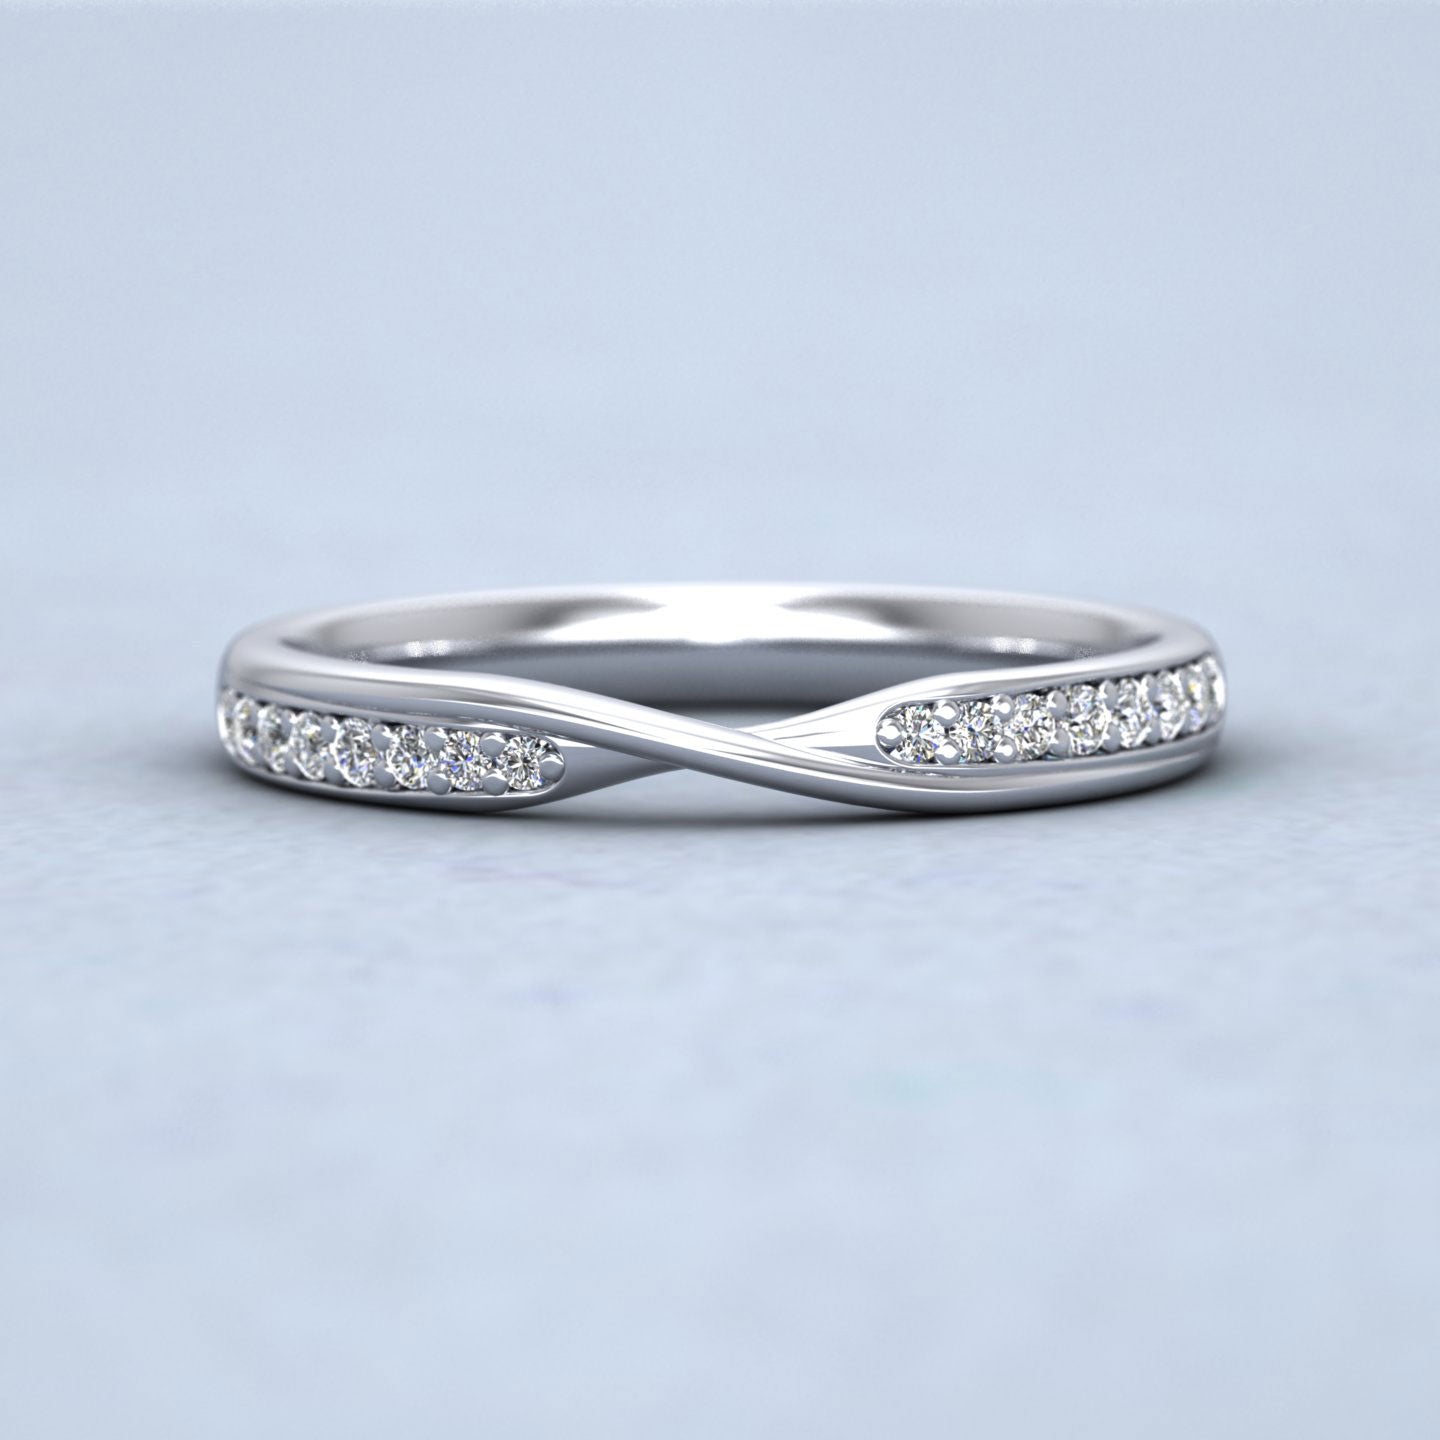 Crossover Pattern Wedding Ring In 950 Platinum 2.5mm Wide With Sixteen Diamonds